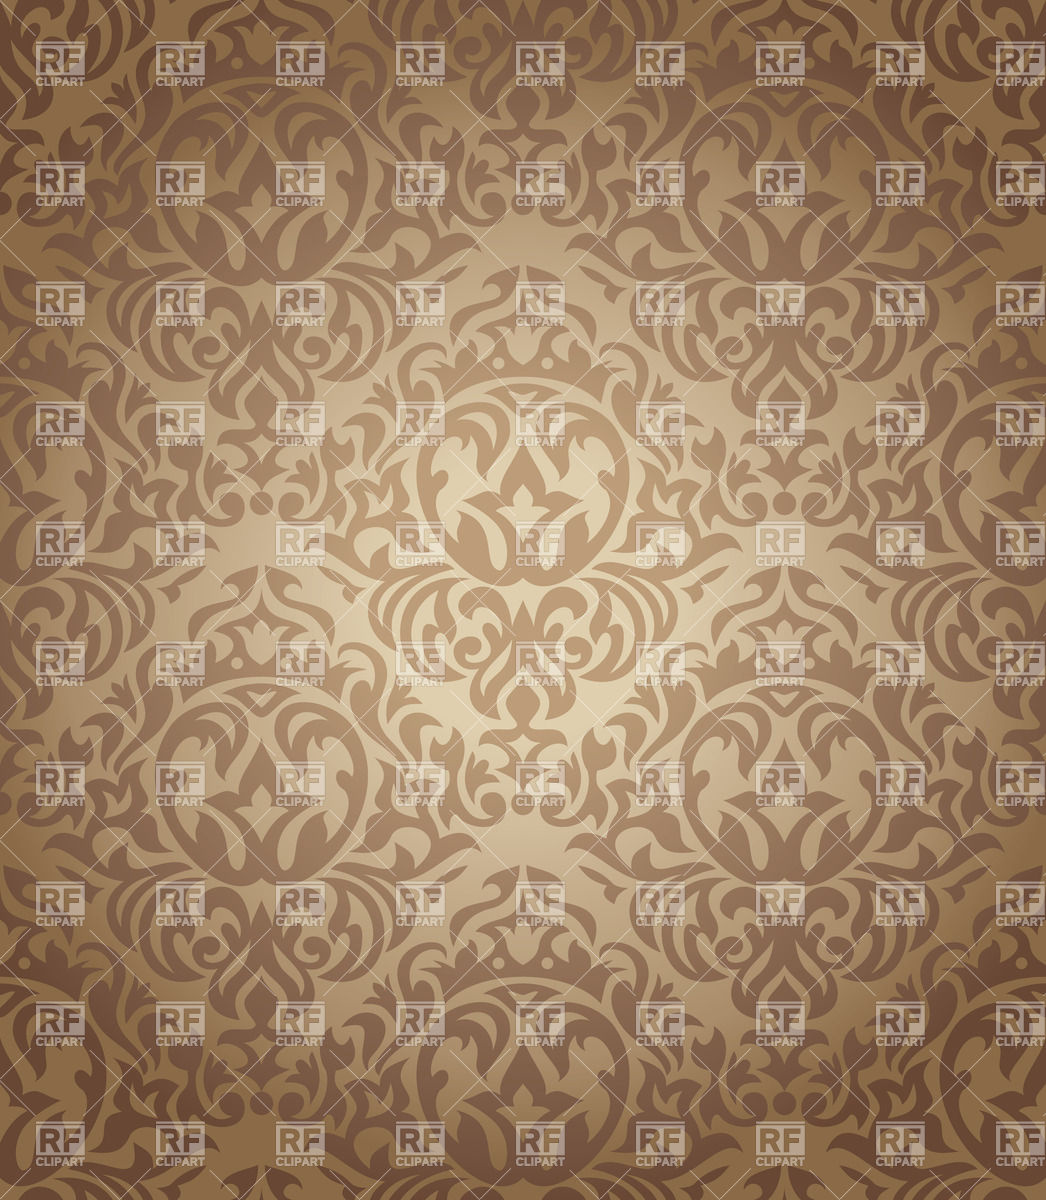 Damask Ornament Wallpaper Sample Background Textures Abstract